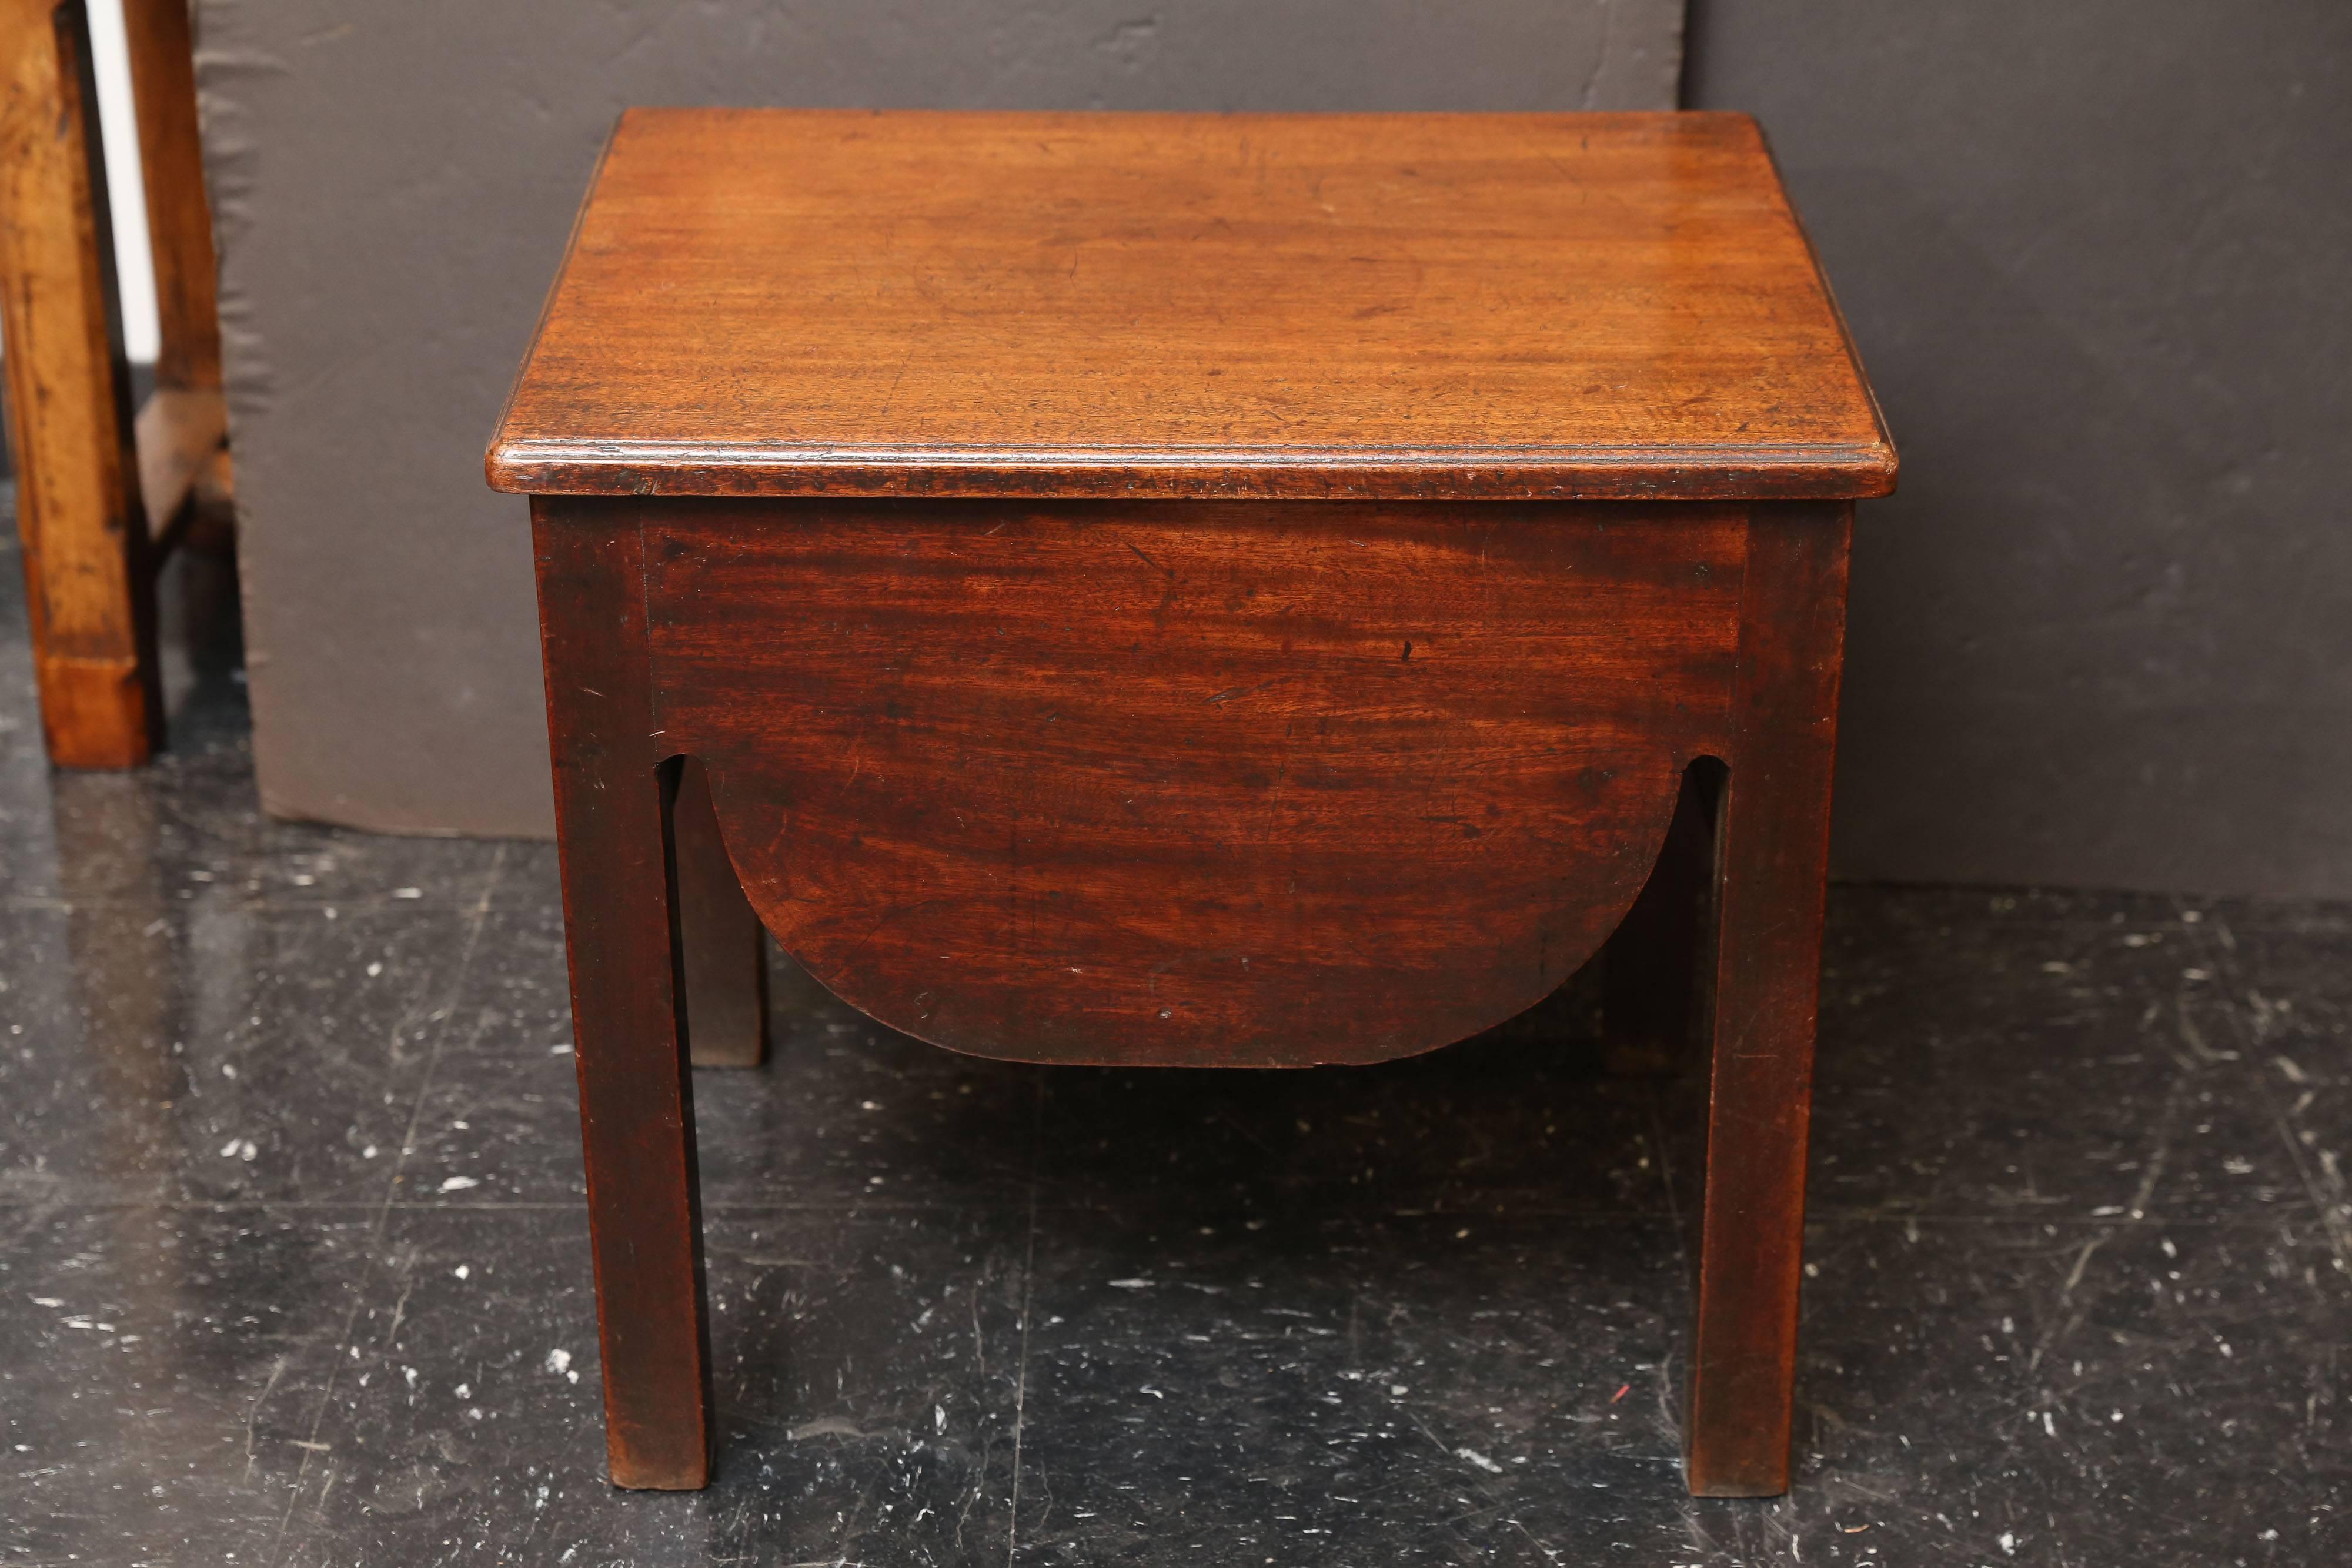 19th century small mahogany side table. Started life holding a chamber pot and has been converted to a small side table with a shaped apron on all four sides.